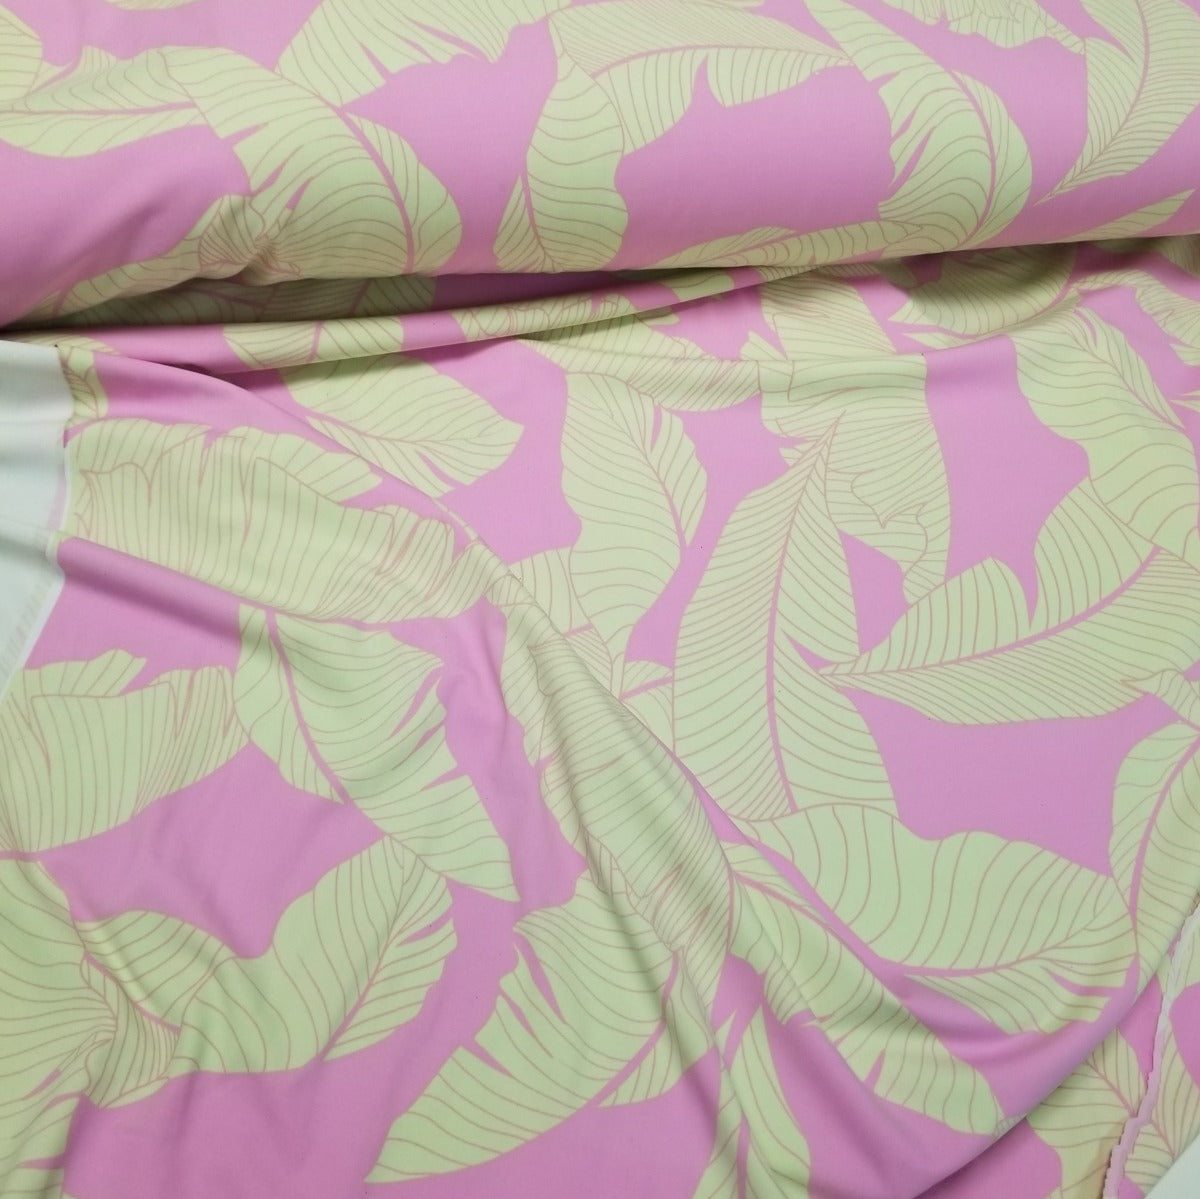 Nylon Spandex Pink and Taupe Beige Resort wear Leaves Swim/Activewear Knit- Sold by the yard